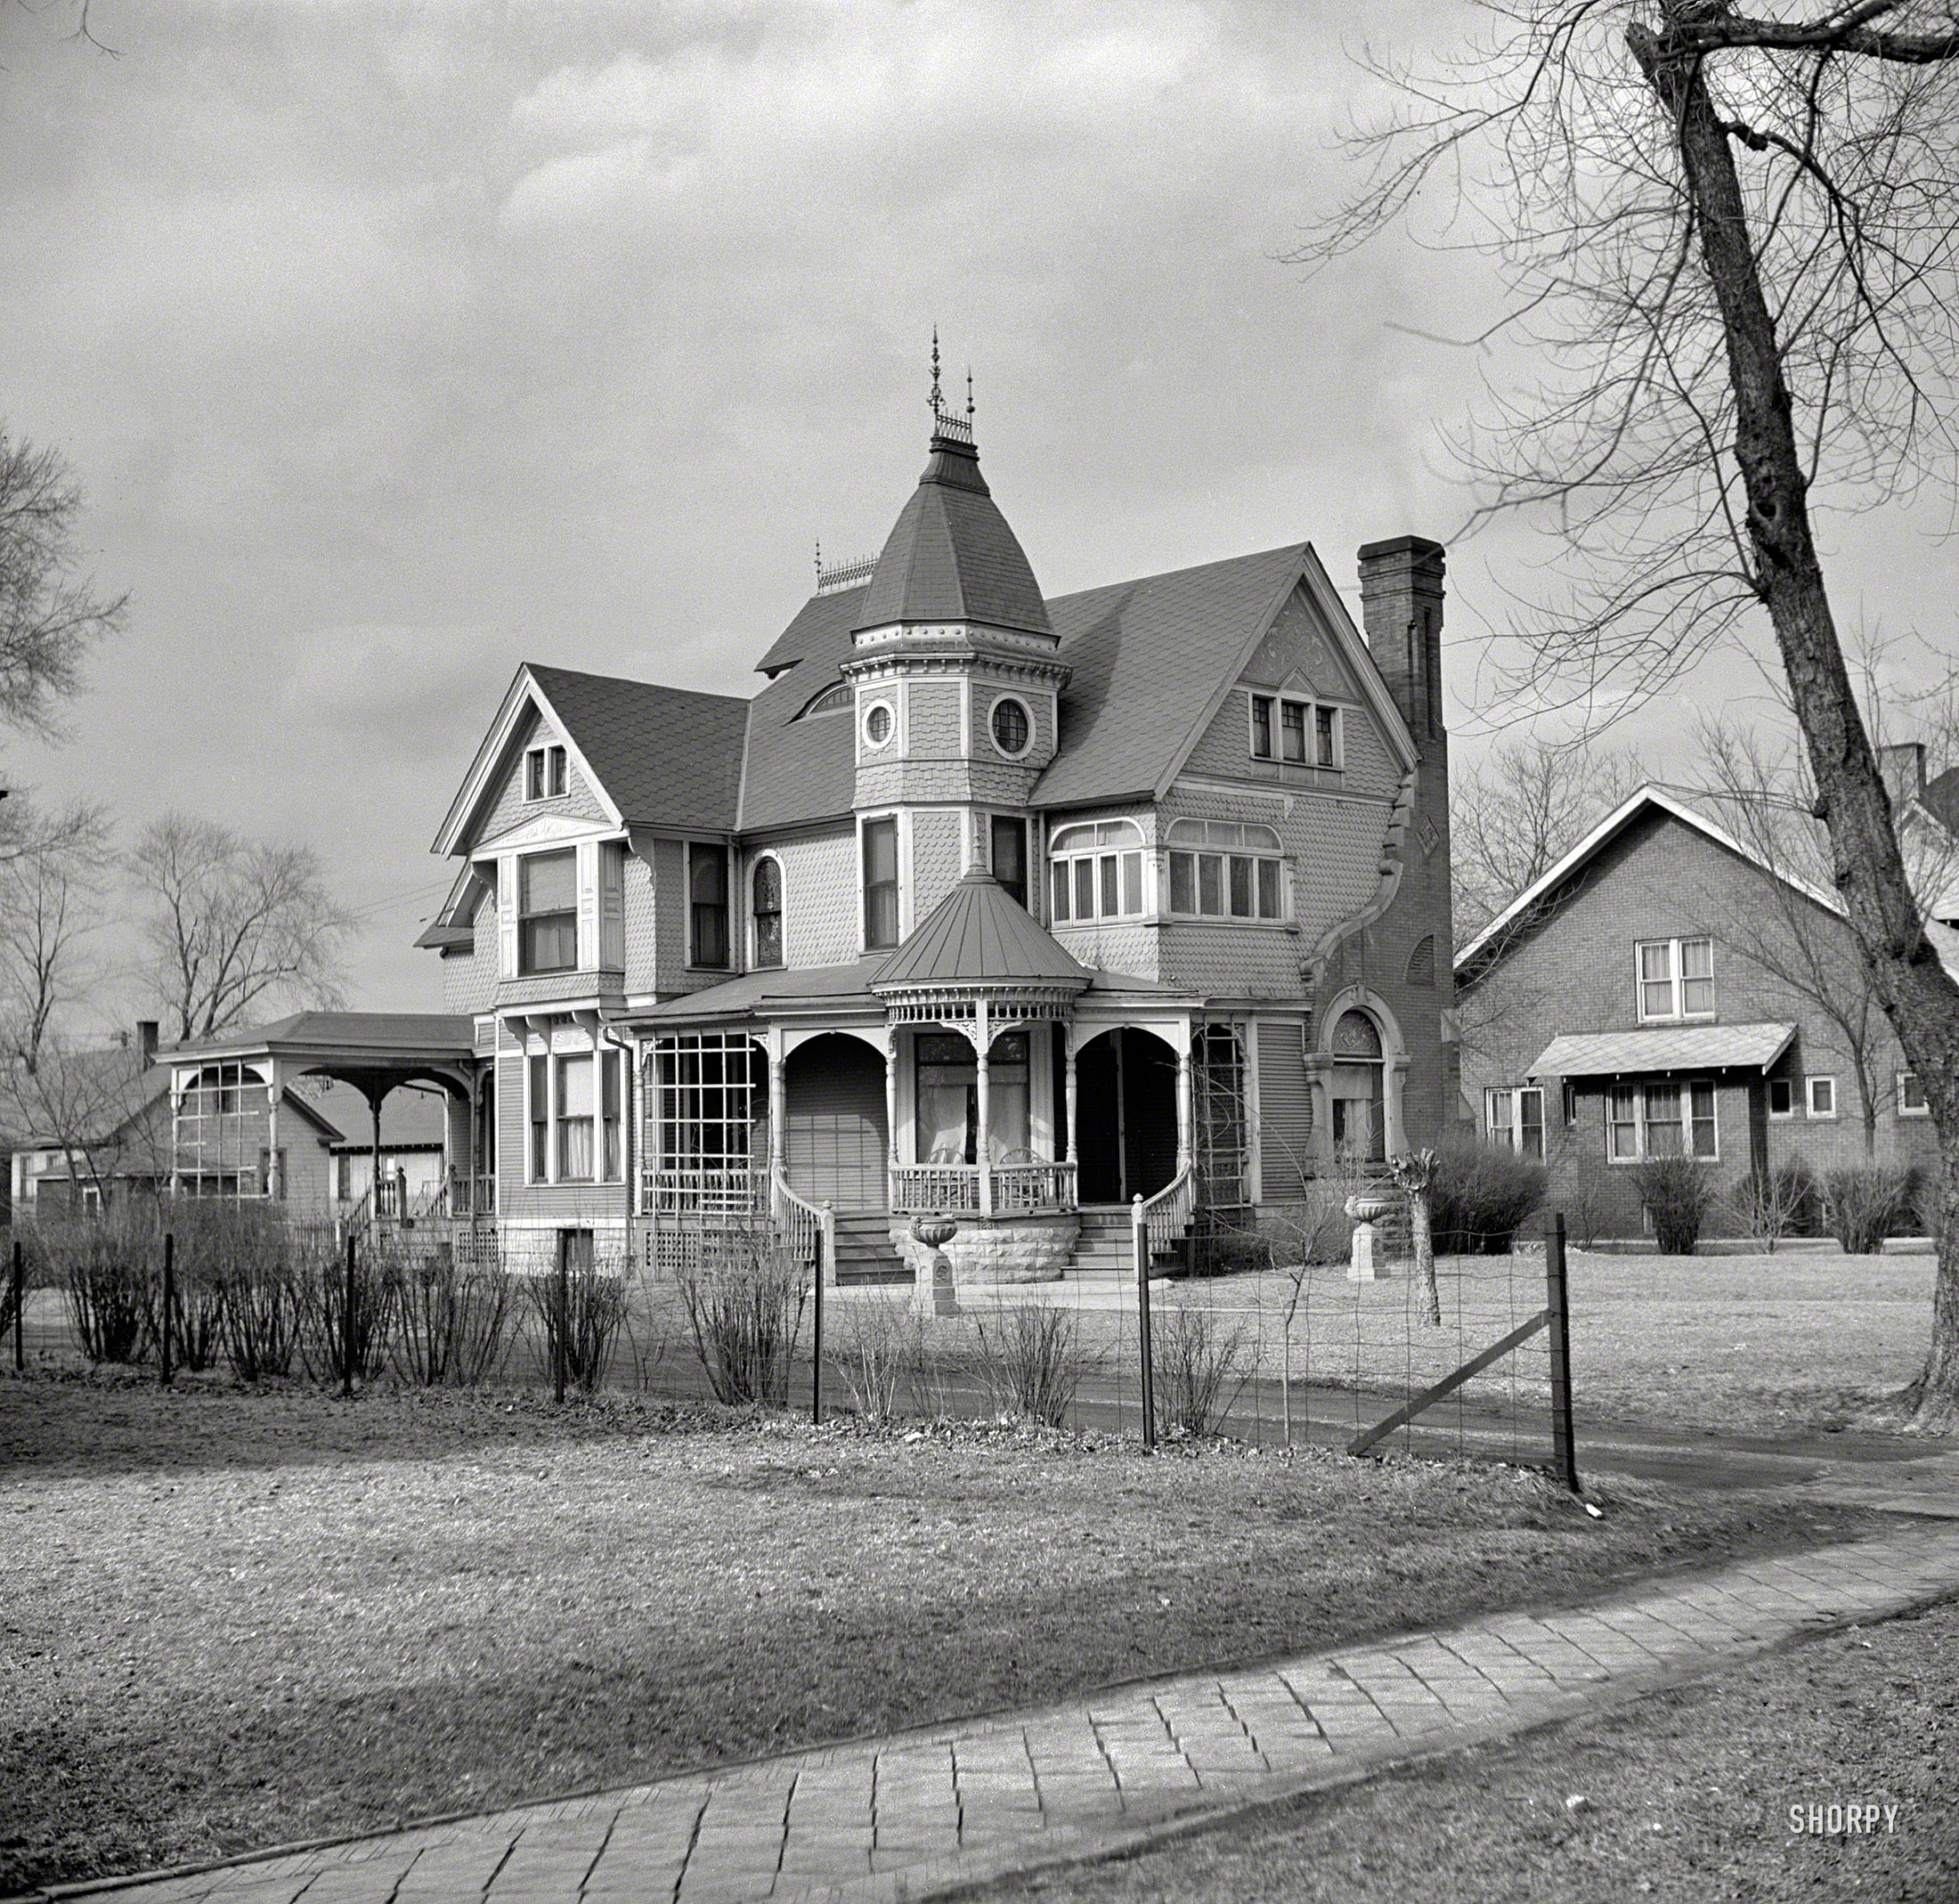 April 1937. "House in Ottawa, Illinois." Bonus points to anyone who can Street View the place, assuming it still stands. Photo by Russell Lee. View full size.
UPDATE: Astute commenters ID this as the Palmer house at 1236 Ottawa Ave.